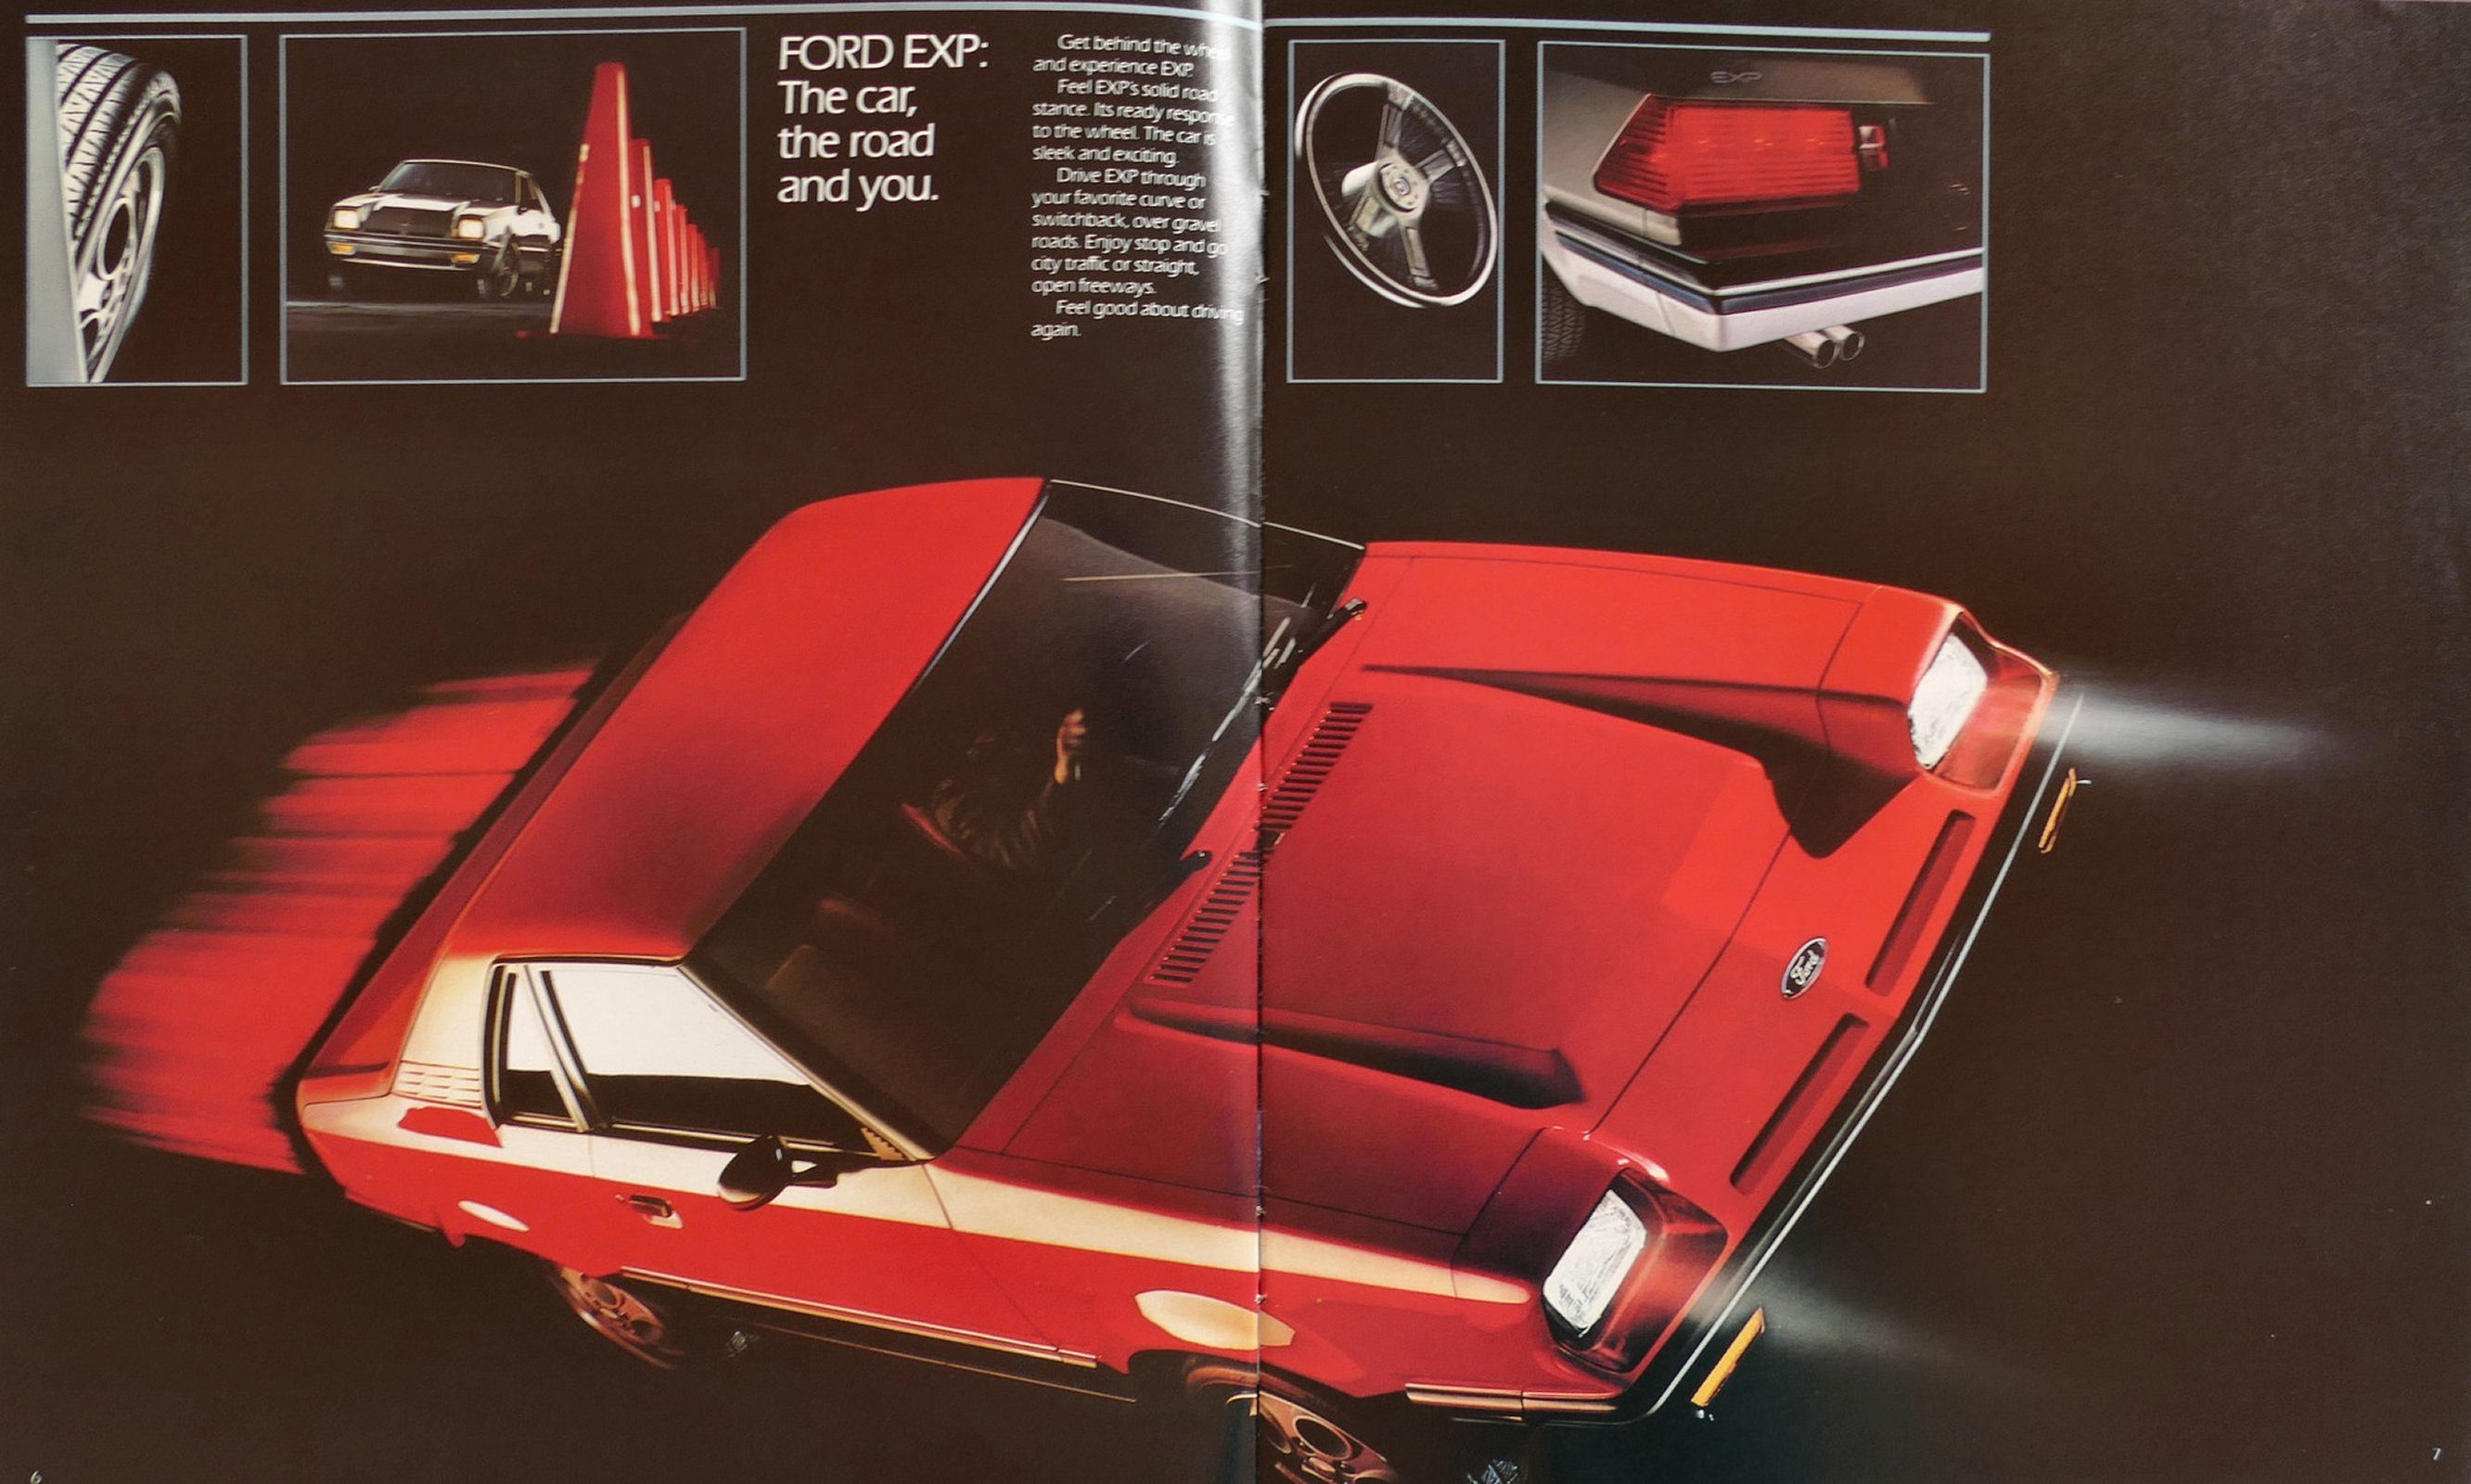 1982 Ford EXP (3-81).pdf-2023-12-31 16.50.13_Page_04